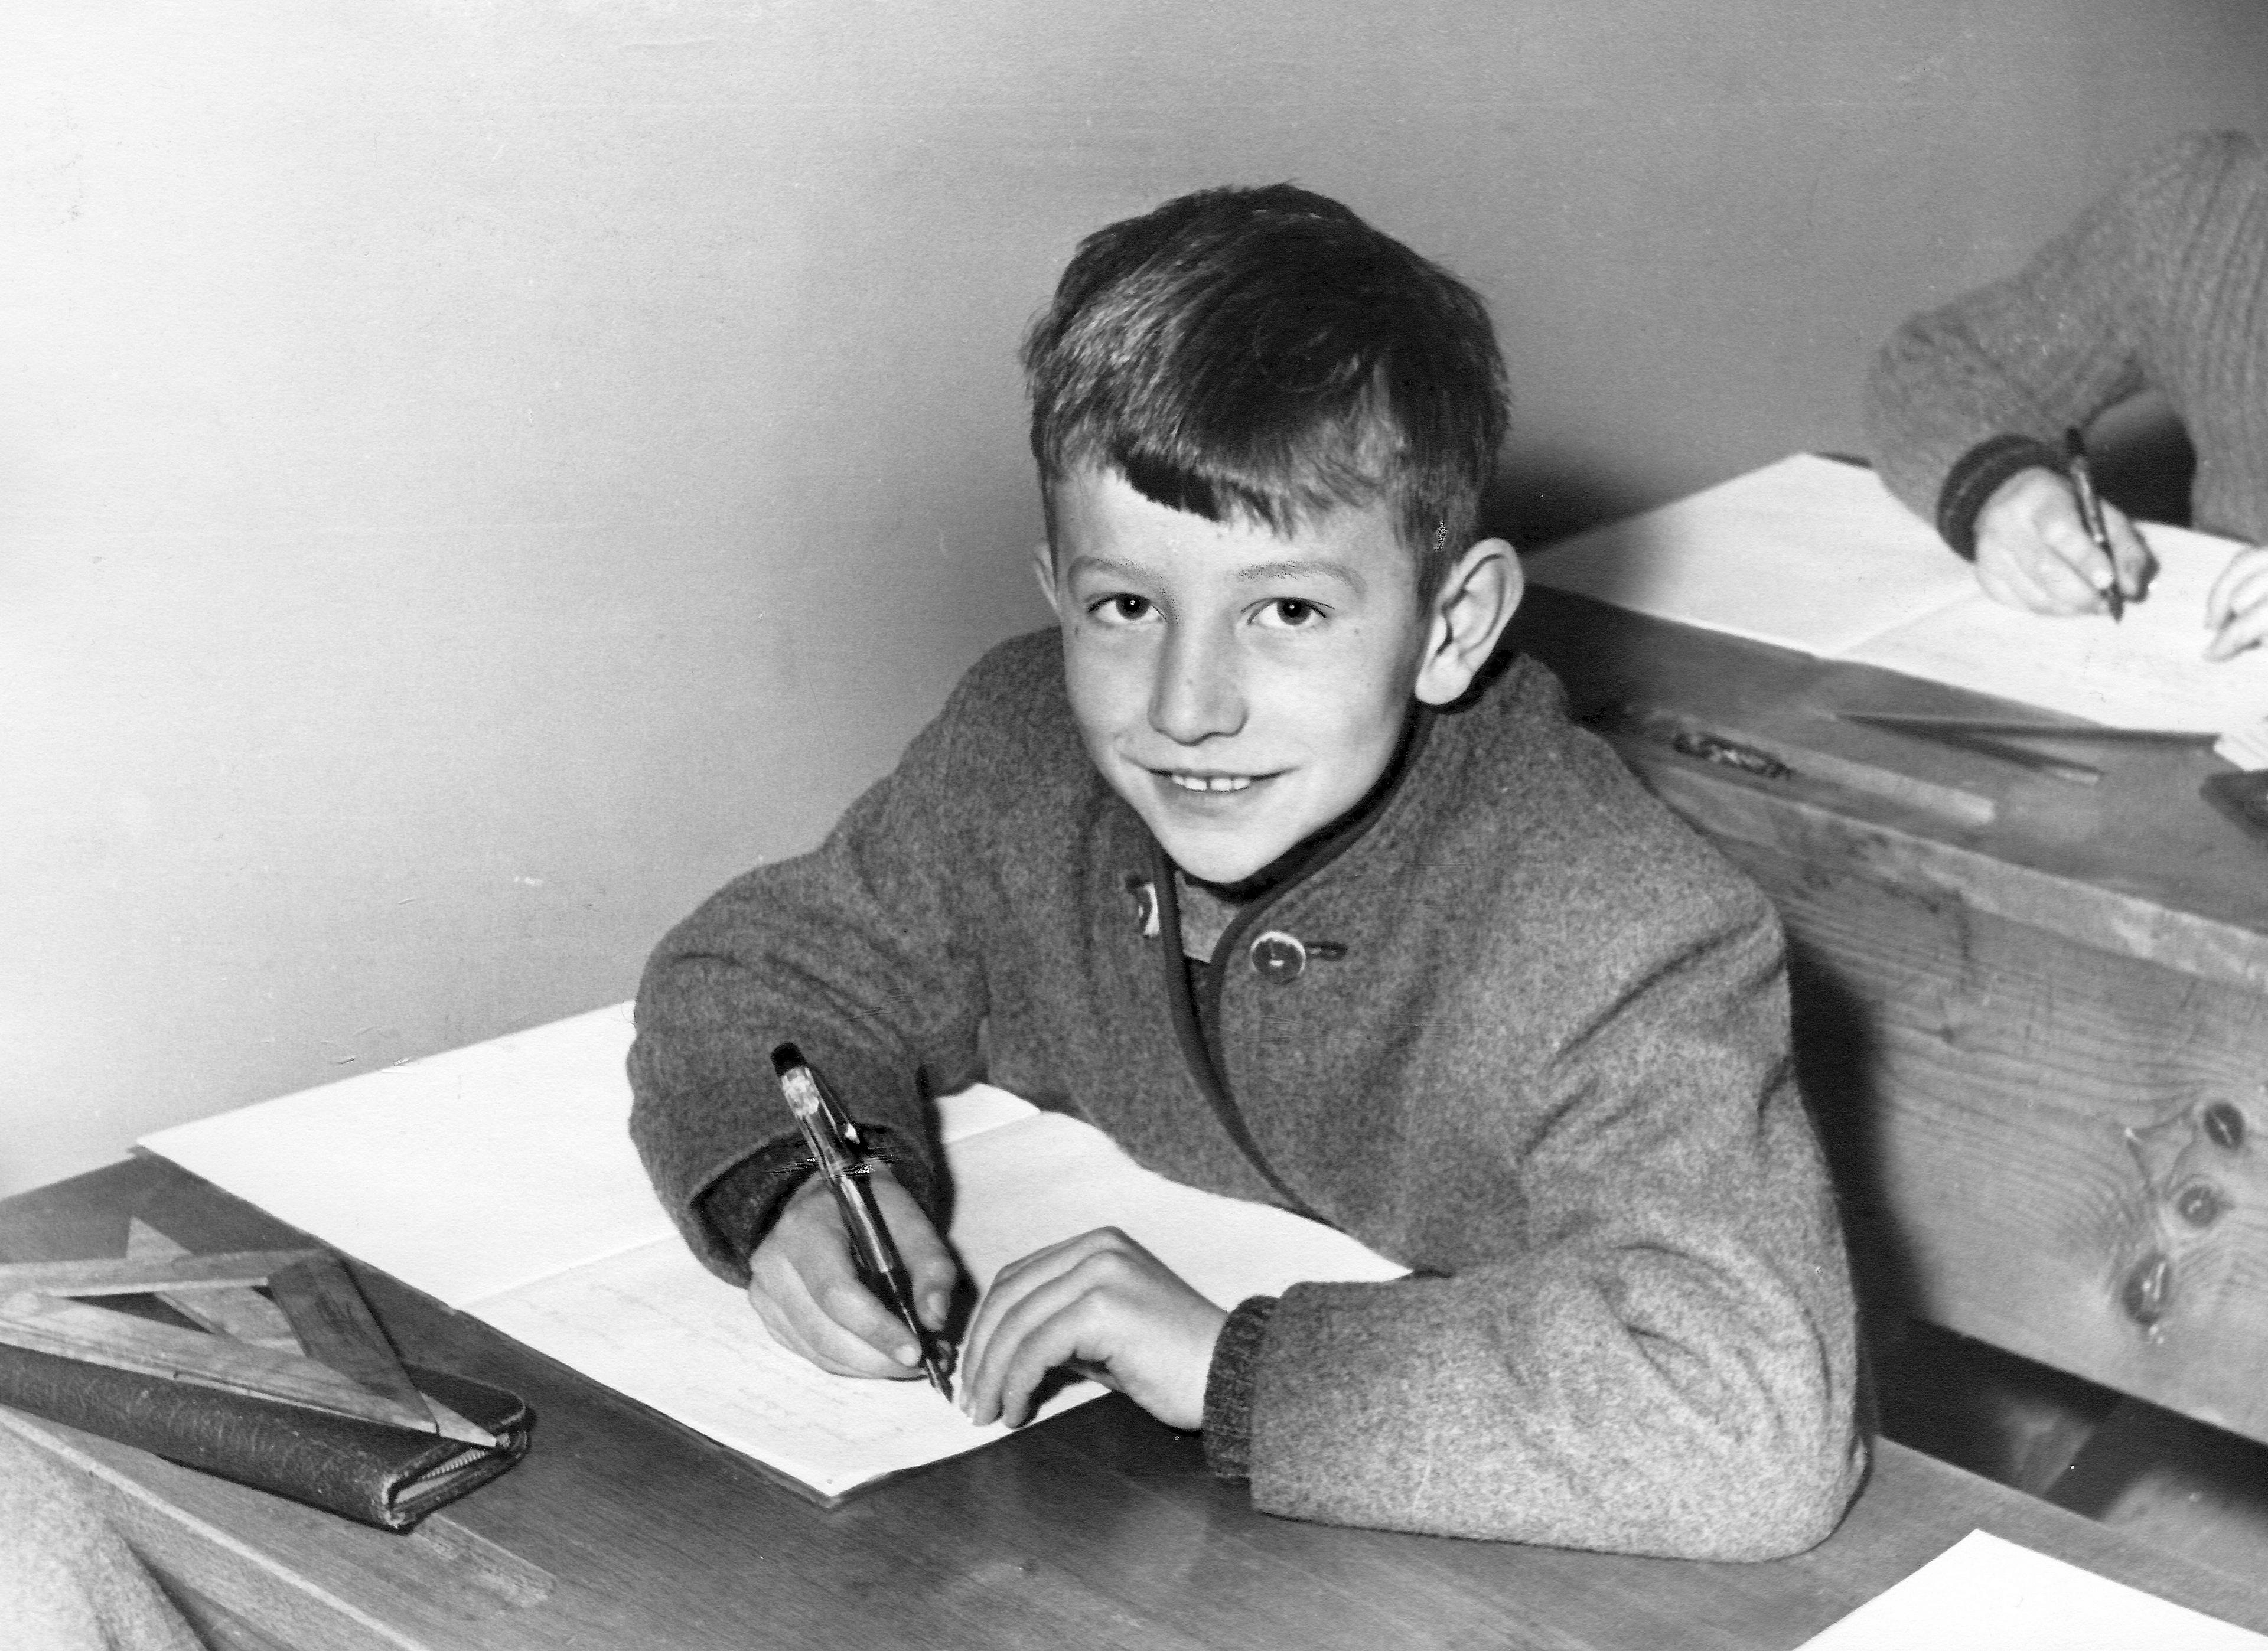 Maximilan Haider at primary school in 1960, age 10